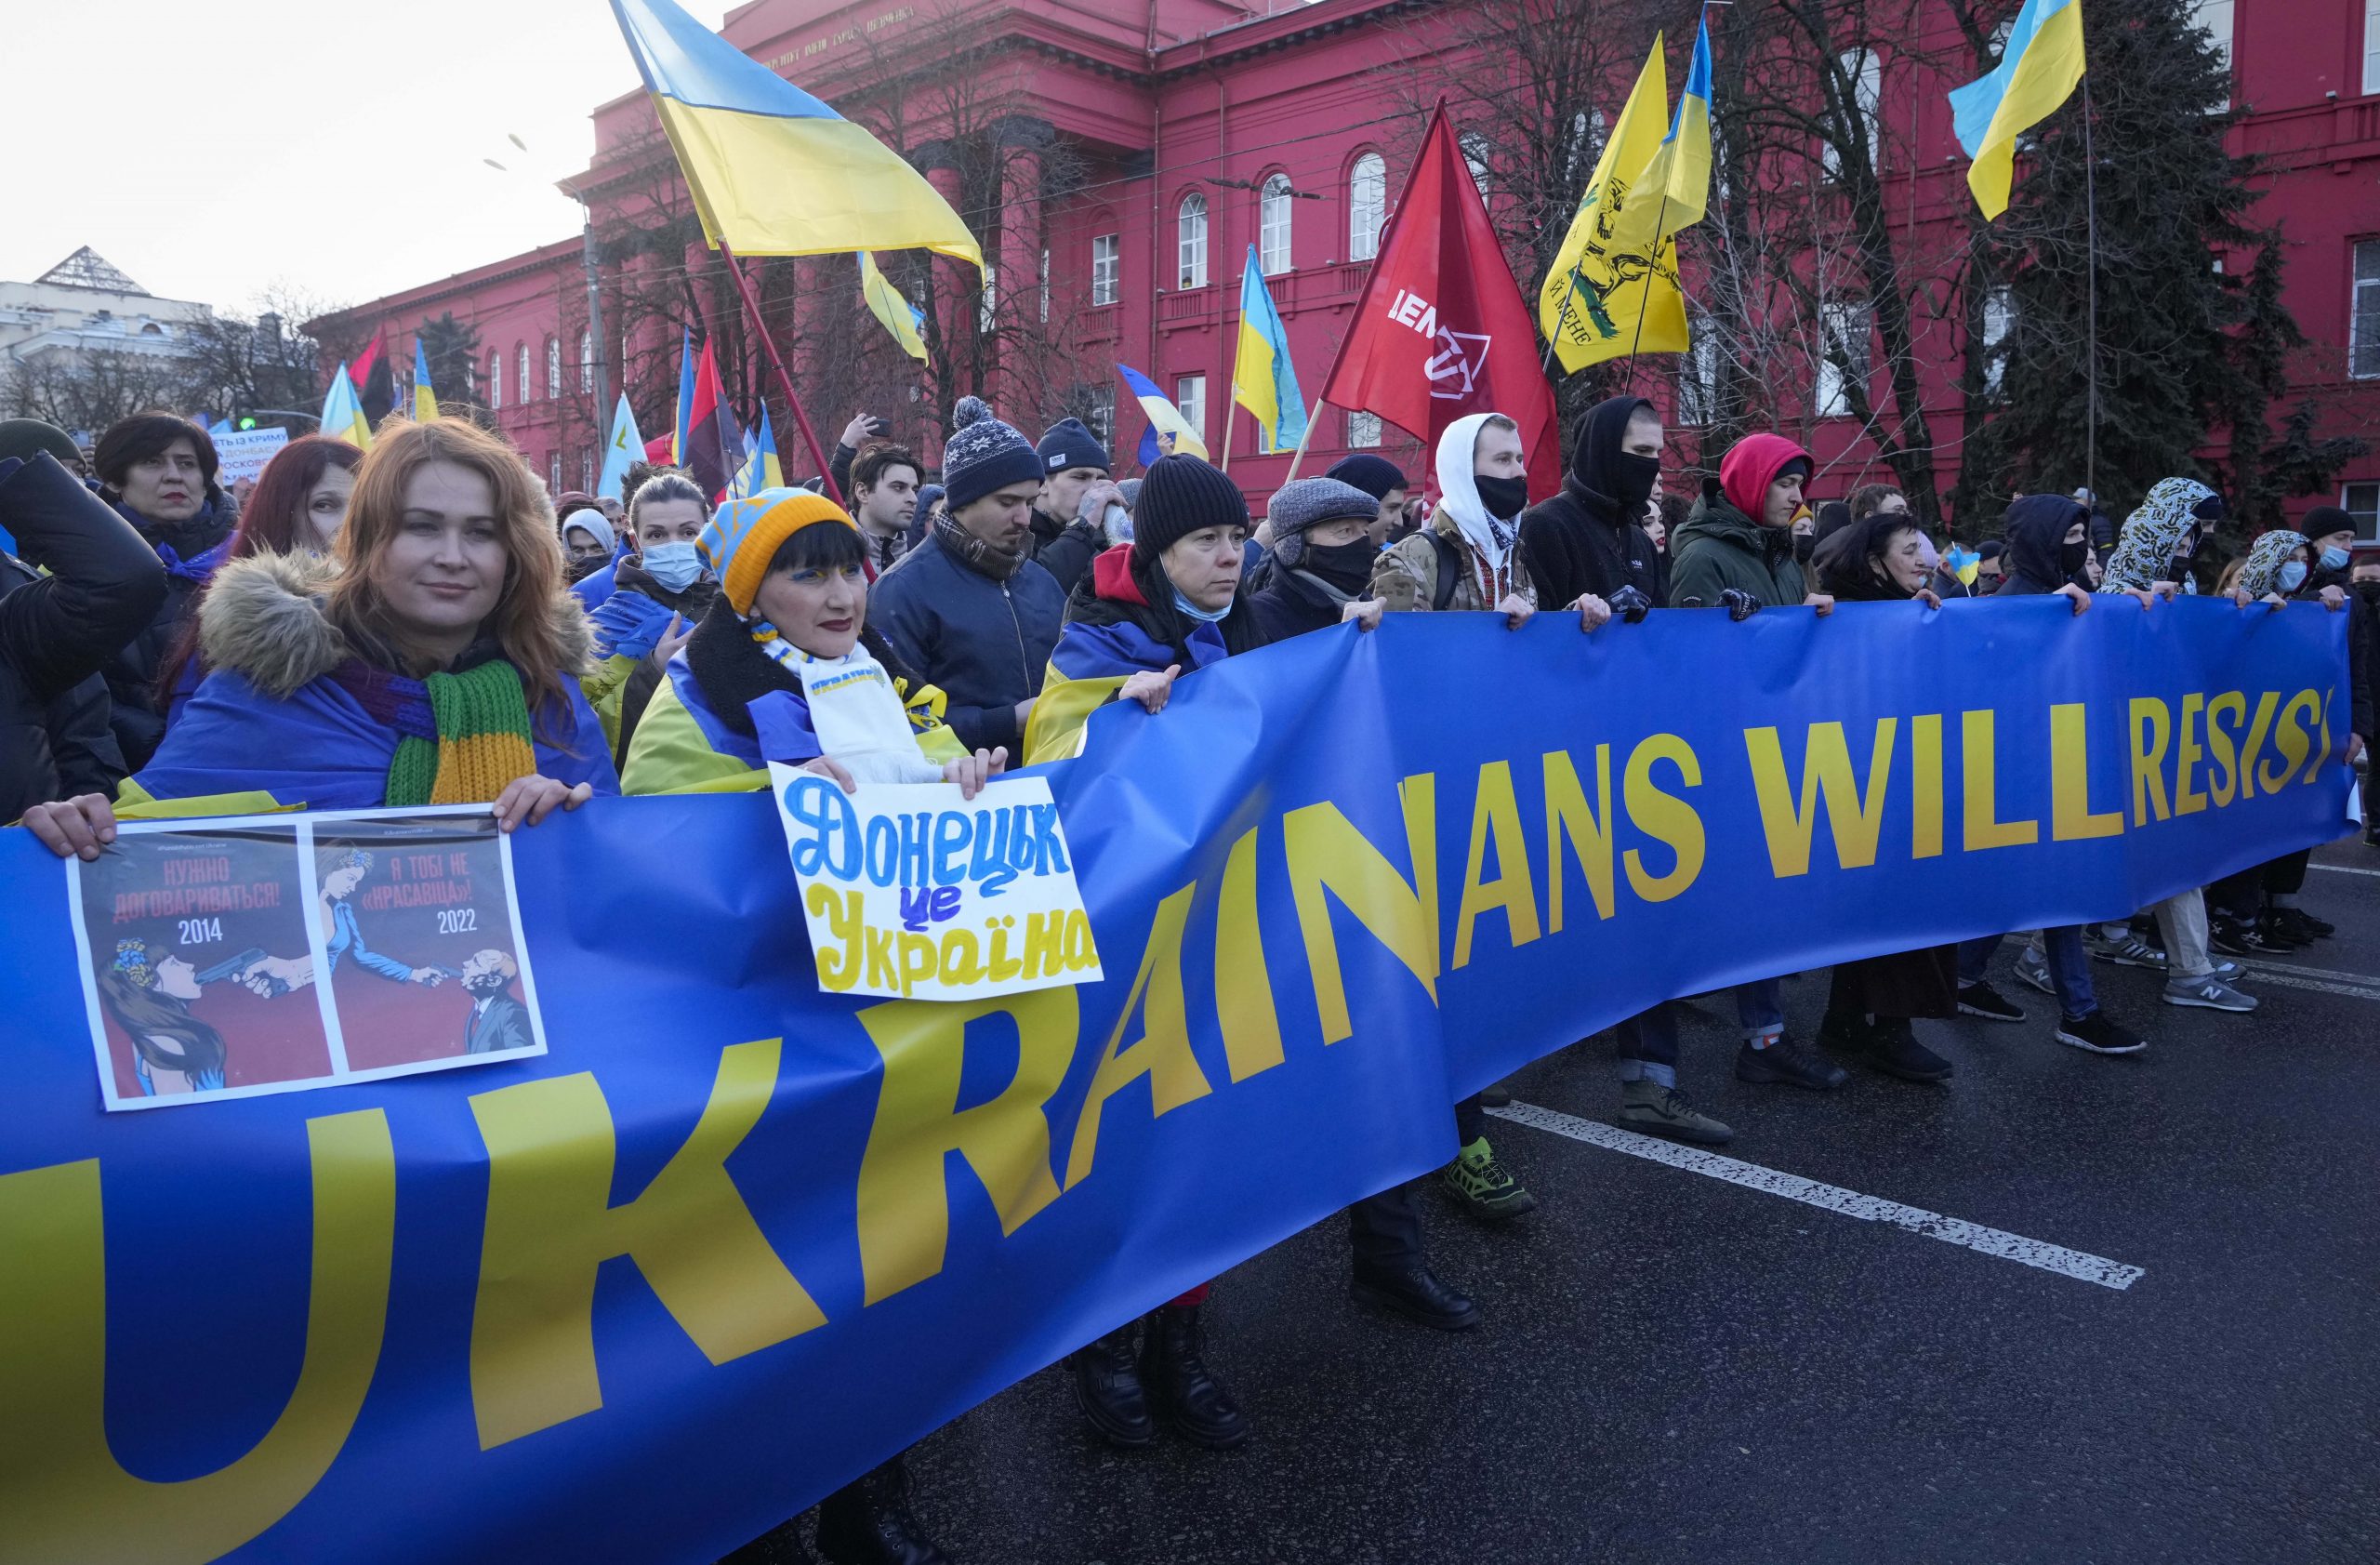 US orders Ukraine embassy to vacate as tension grow with Russia